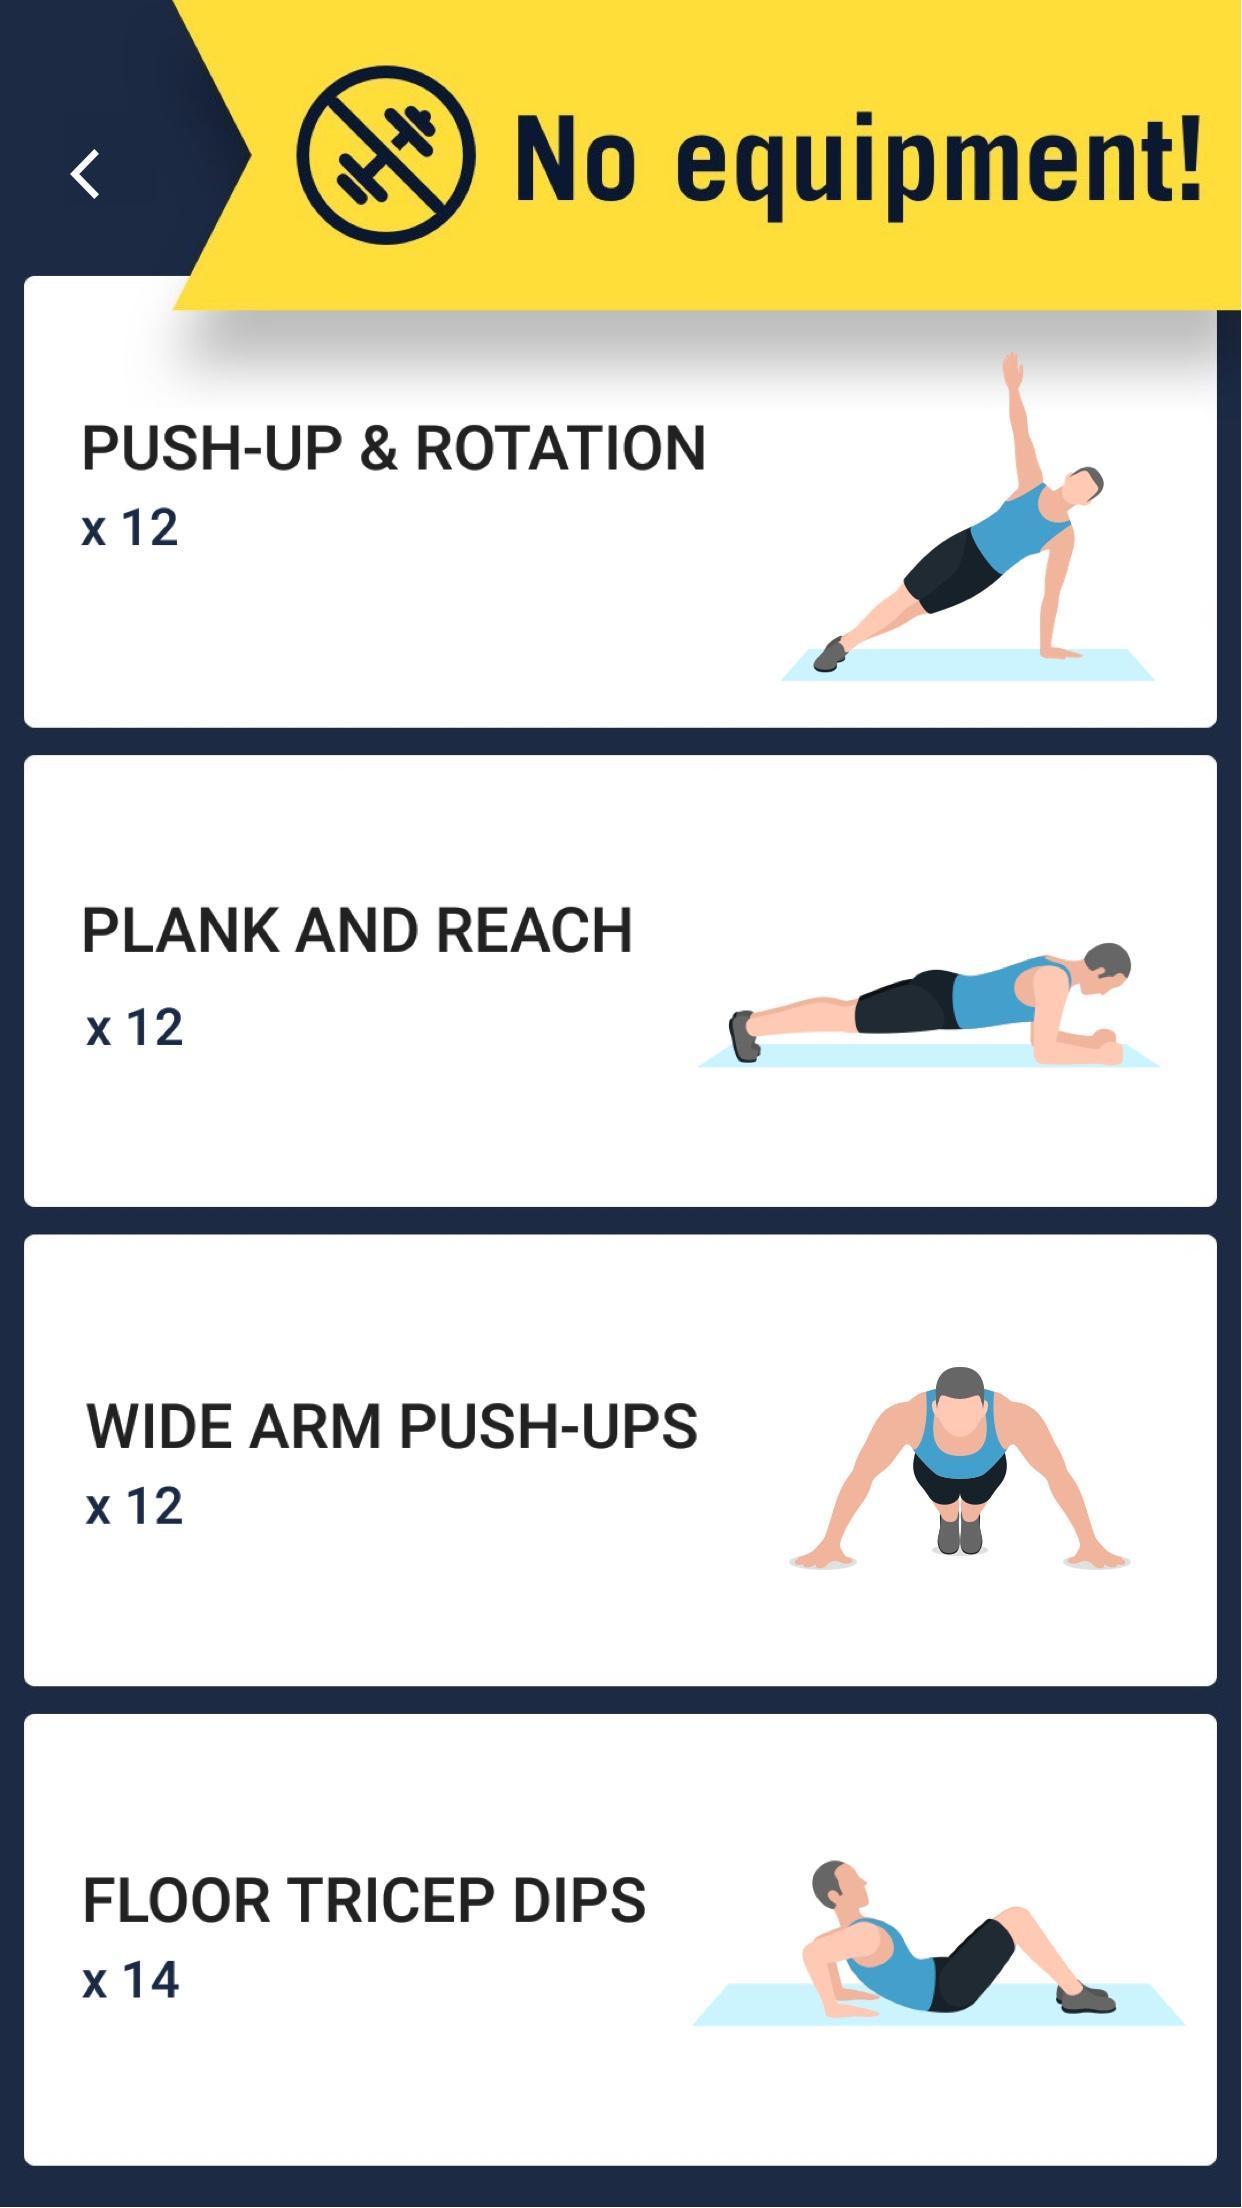 5 Day Arm Workout App Android for Build Muscle